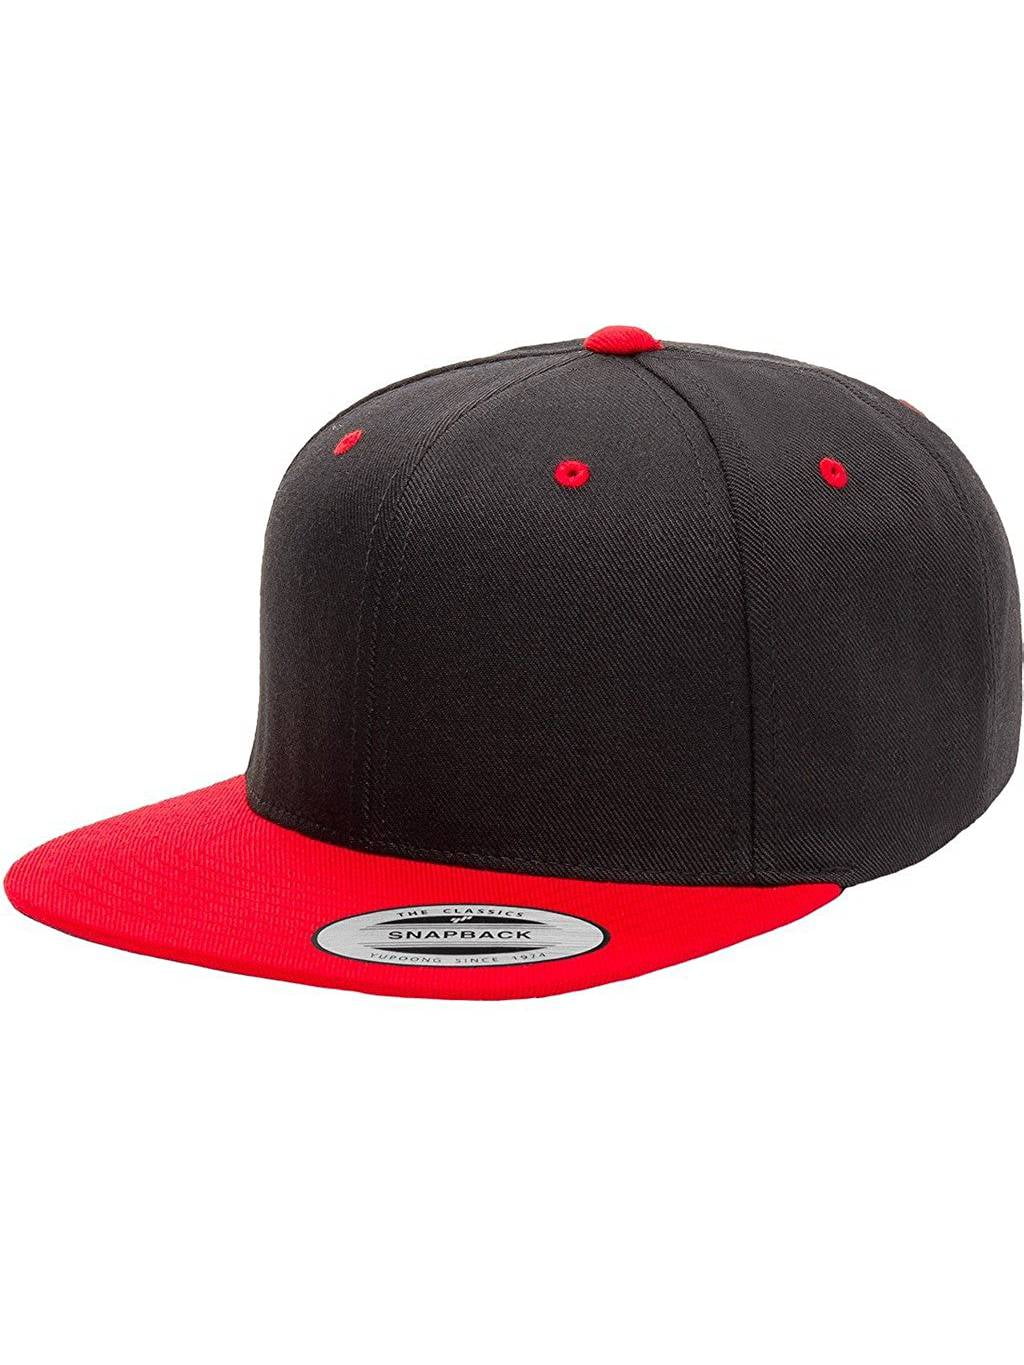 Style Snapback Black/Red Classic Cap, 2-Tone 6-Panel Yupoong